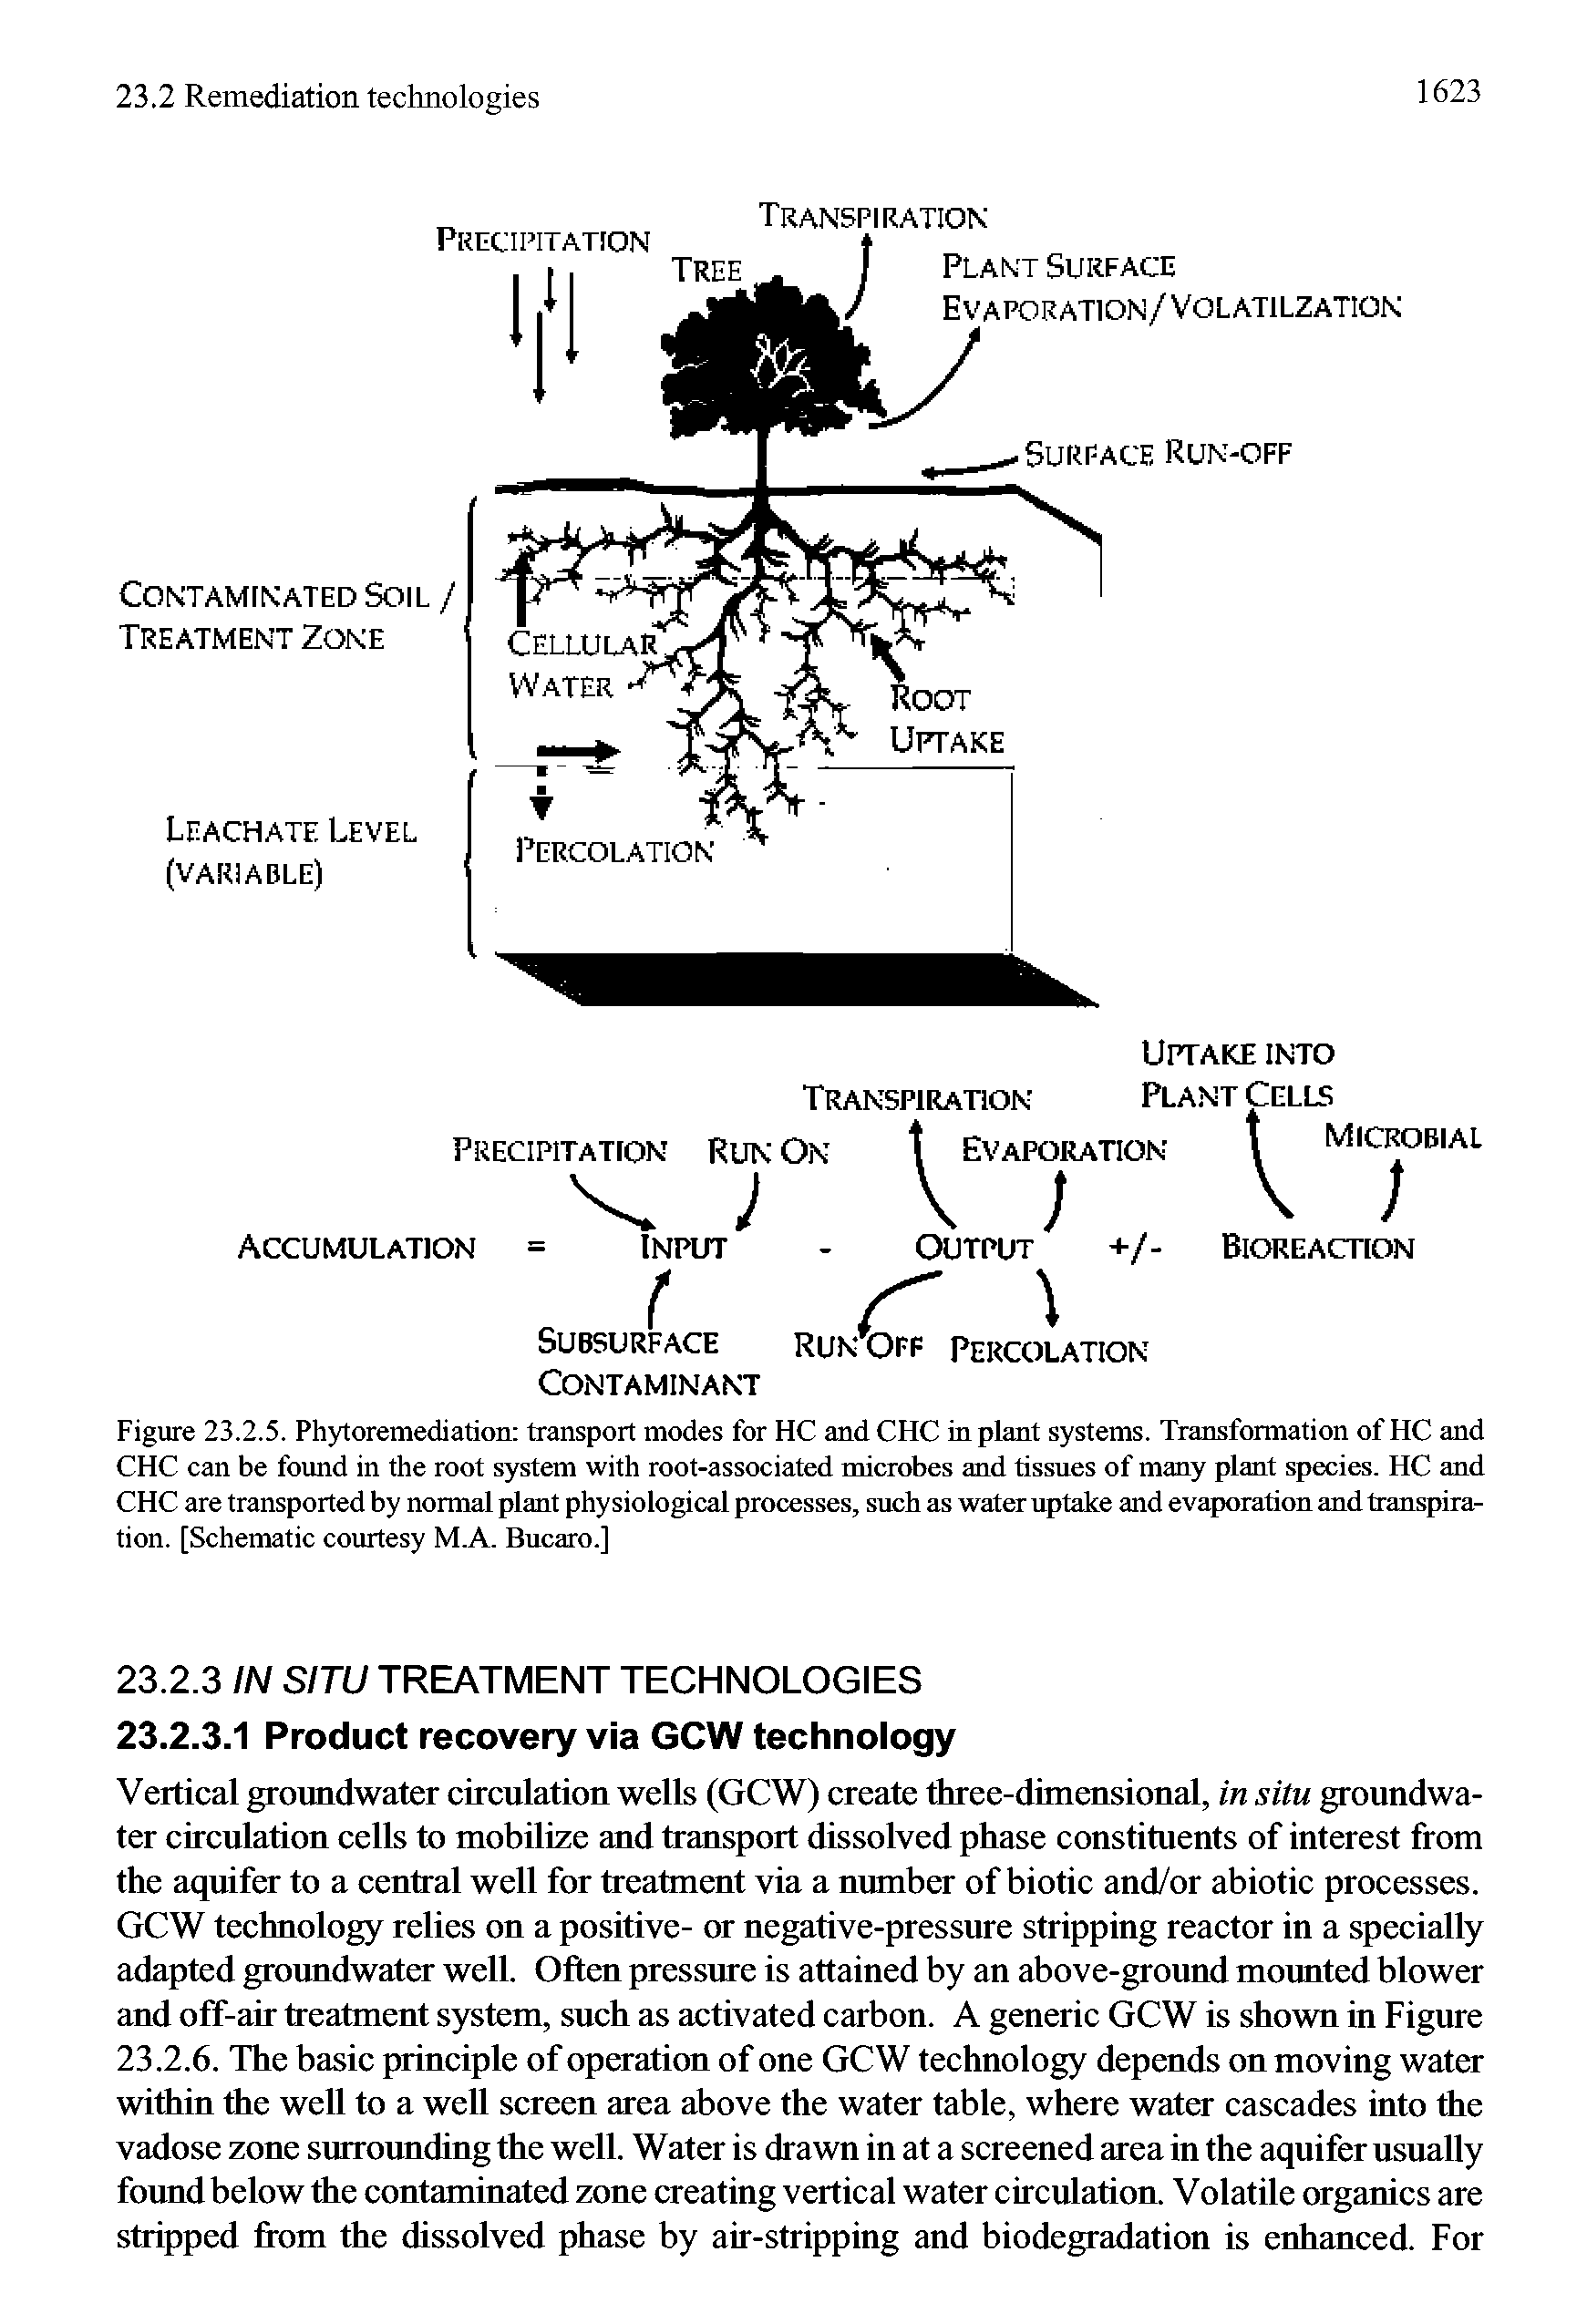 Figure 23.2.5. Phytoremediation transport modes for HC and CHC in plant systems. Transformation of HC and CHC can be found in the root system with root-associated microbes and tissues of many plant species. HC and CHC are transported by normal plant physiological processes, such as water uptake and evaporation and transpiration. [Schematic courtesy M.A. Bucaro.]...